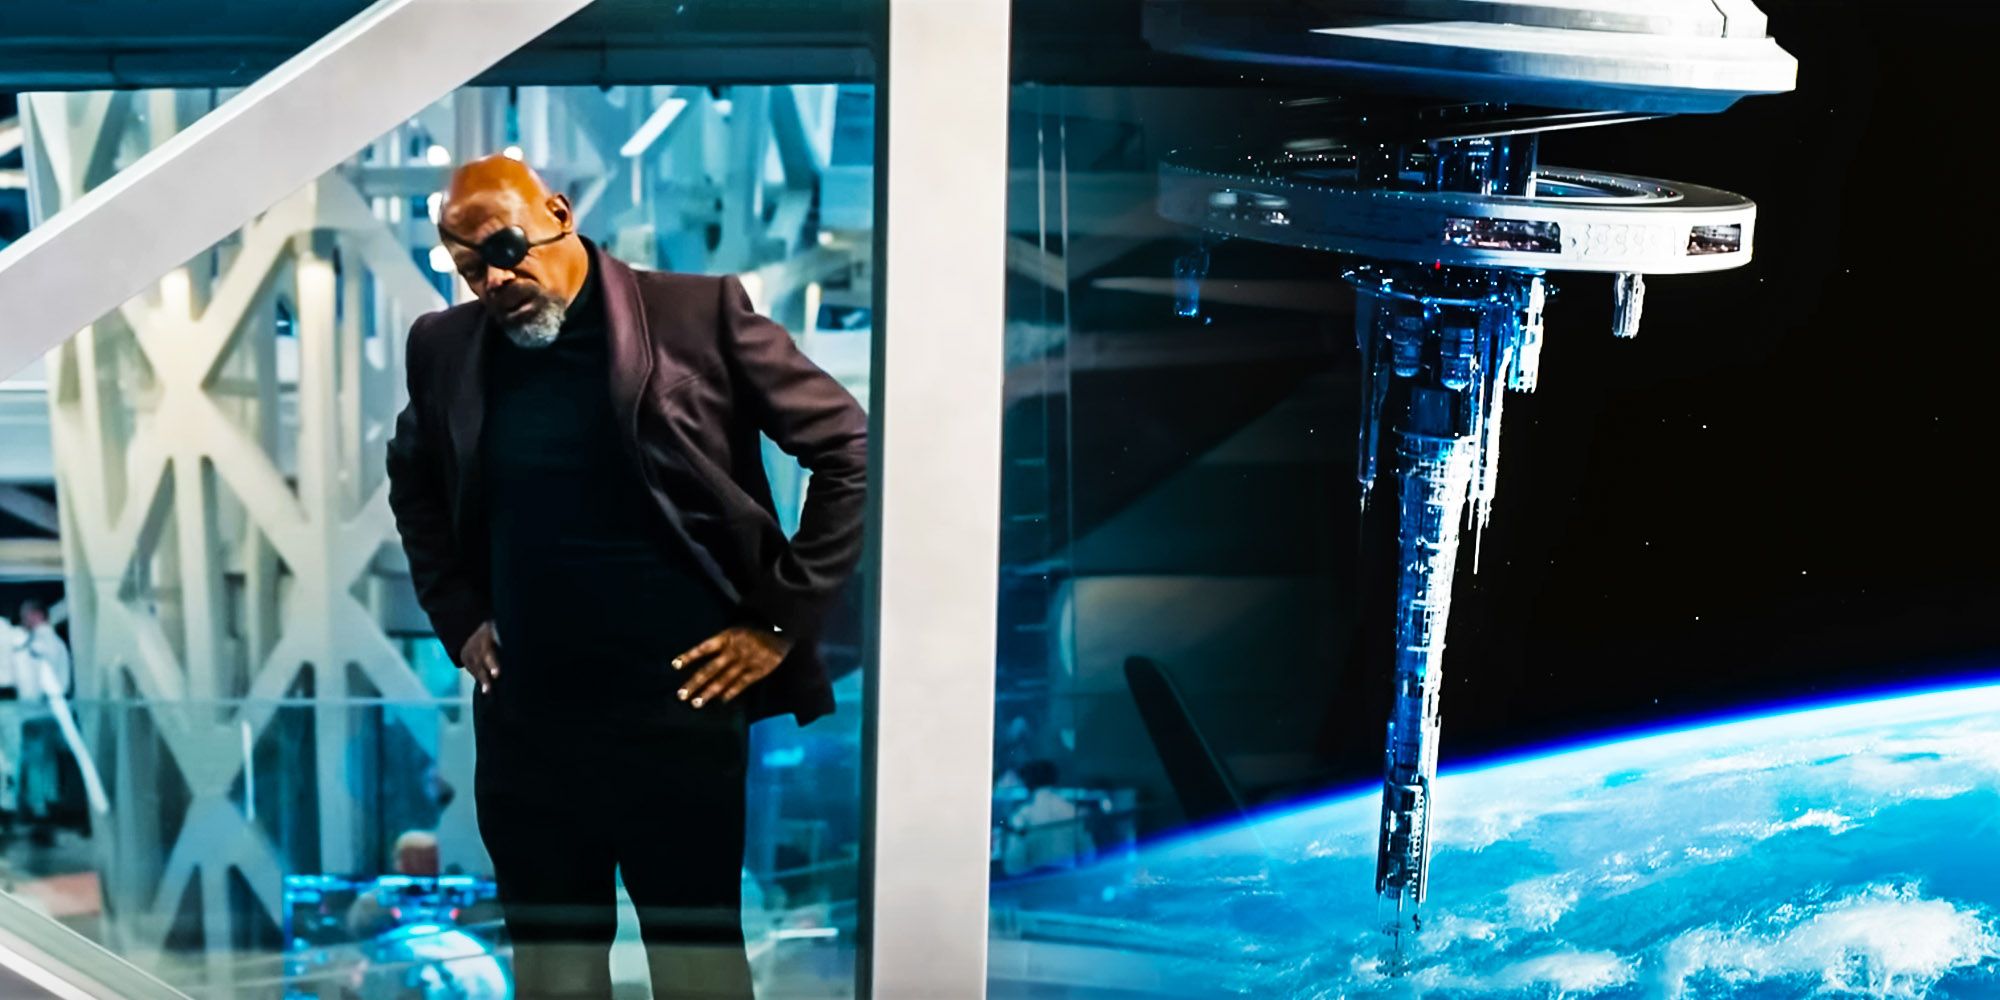 Nick fury in The Marvels' space station side by side by an outside view of the facility.